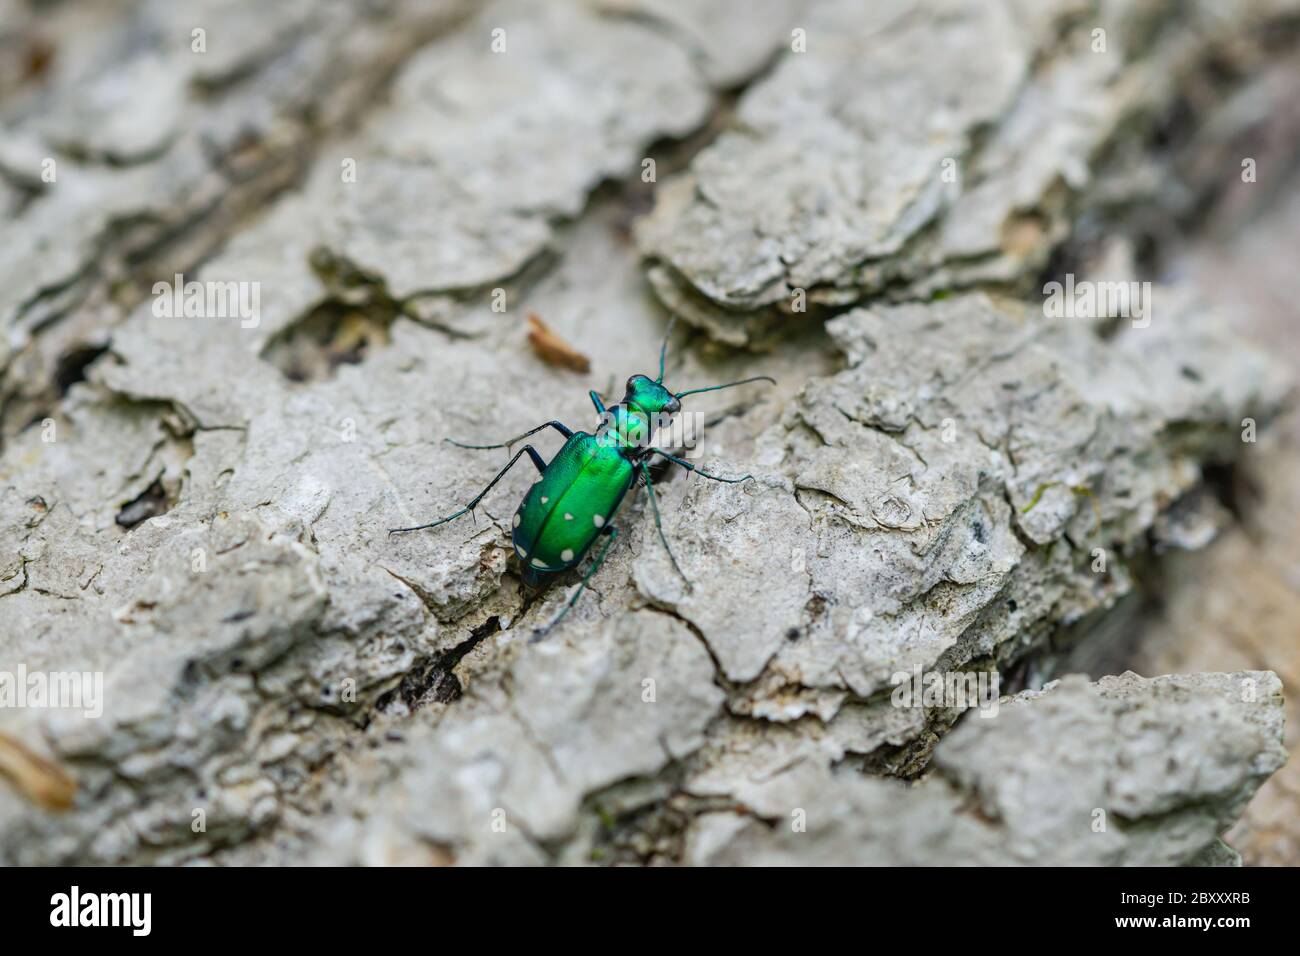 Six-Spotted Tiger Beetle in Springtime Stock Photo